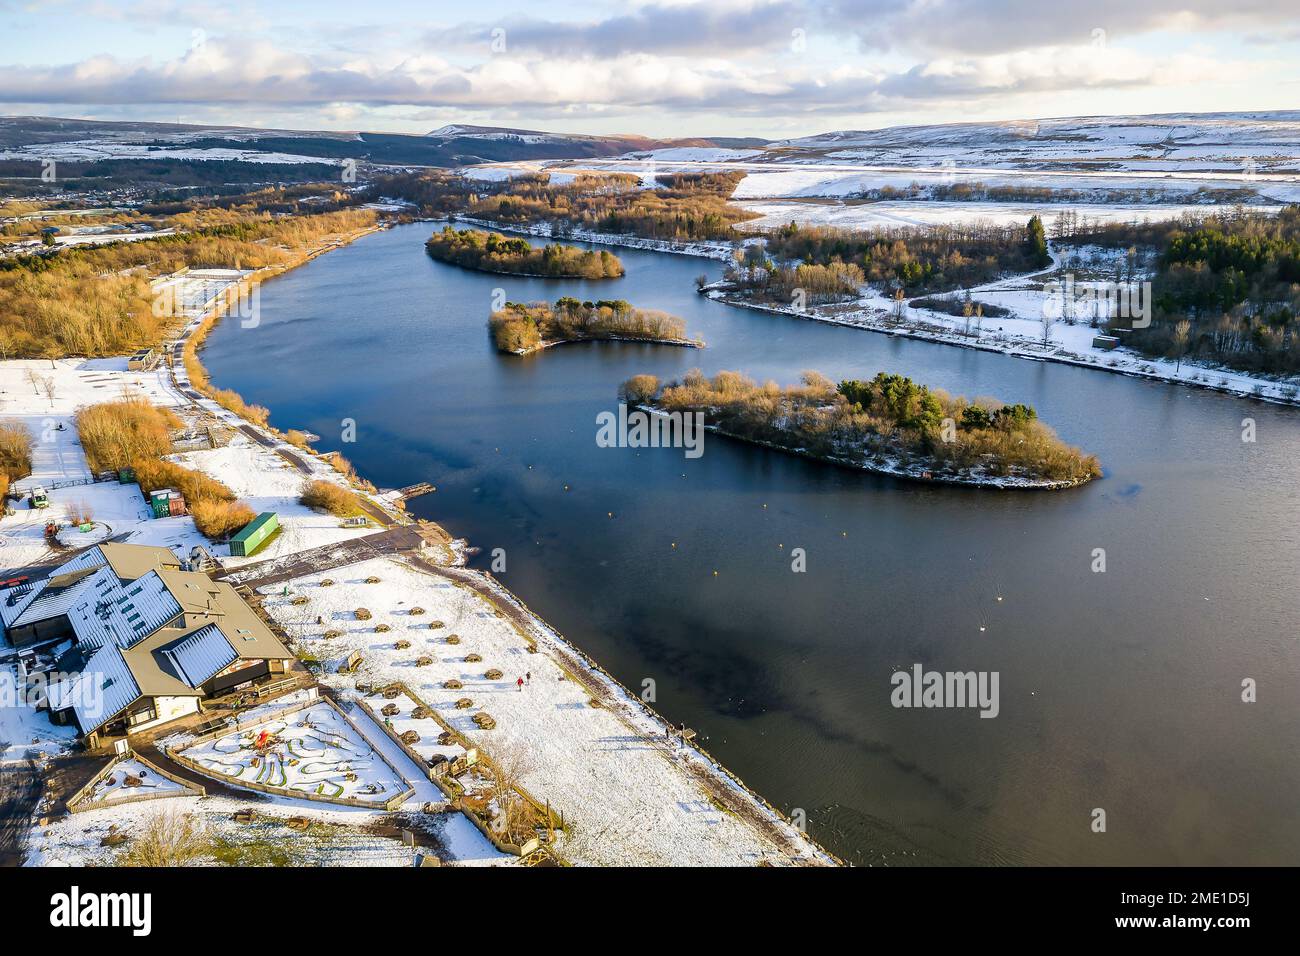 Aerial view of a freezing lake surrounded by snow in the South Wales Valleys (Bryn Bach) Stock Photo